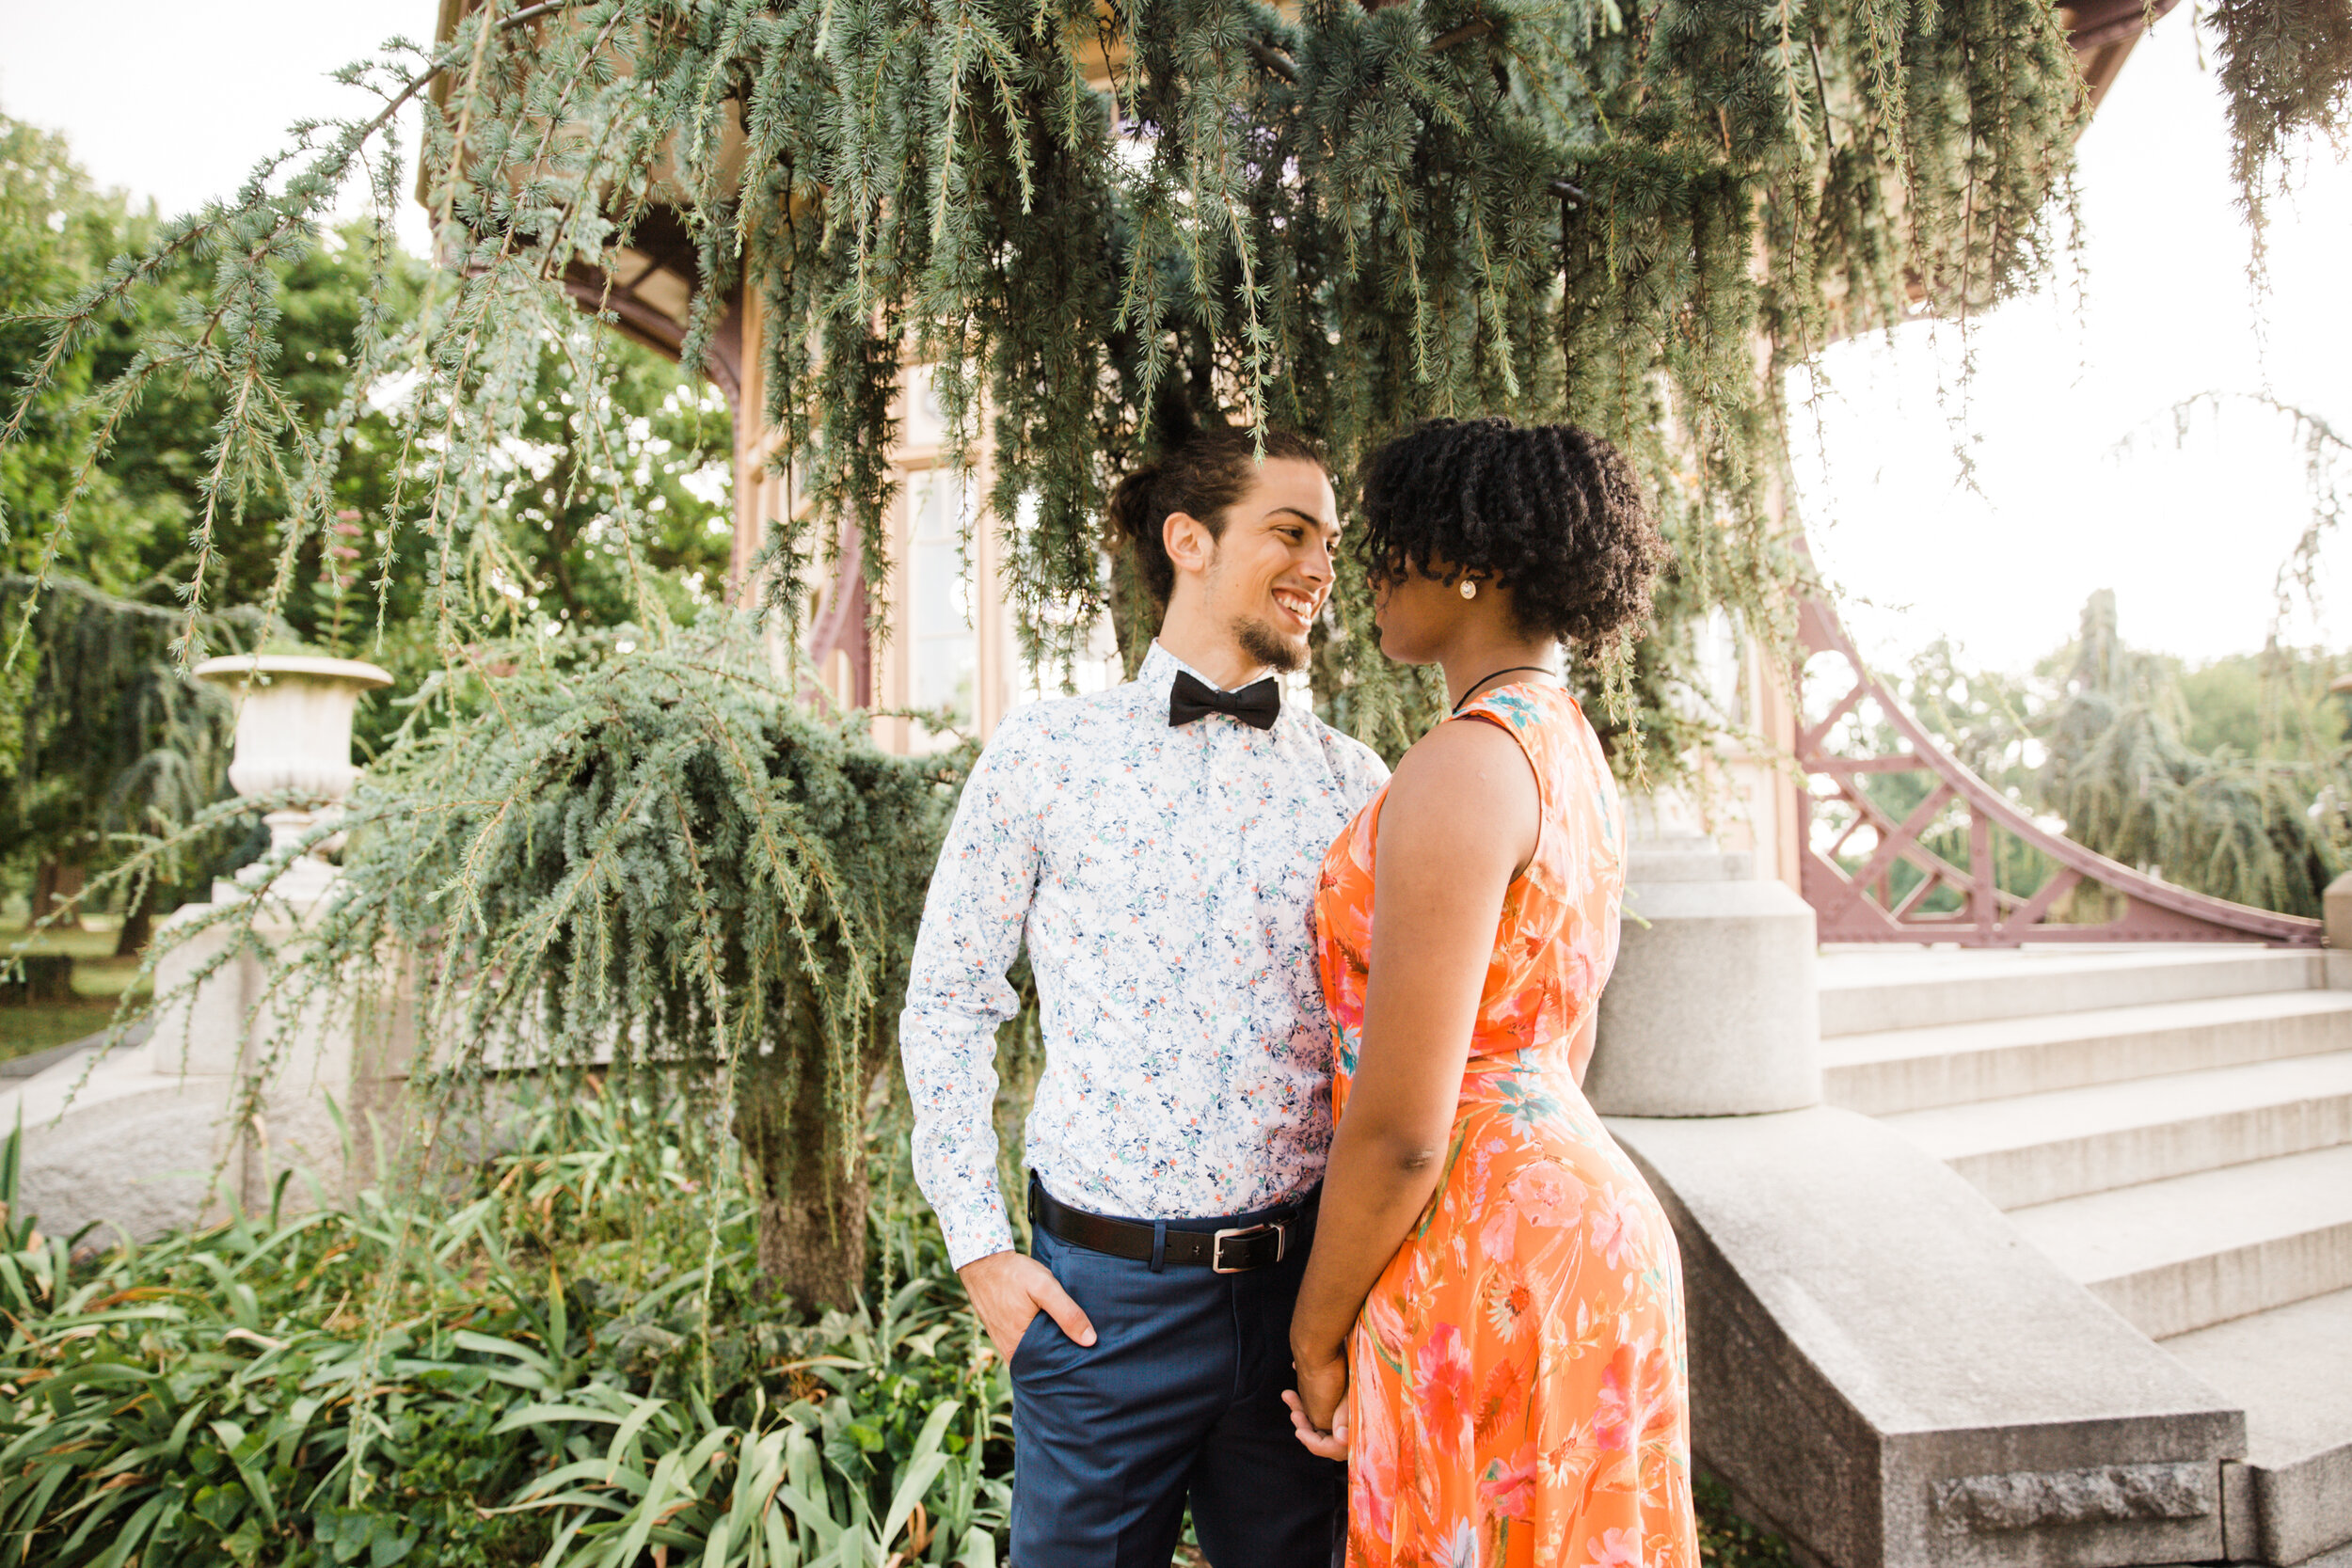 Golden Hour Engagement Session in Baltimore Maryland Patterson Park Pagoda DC Wedding Photographers Megapixels Media Photography and Videography Mixed Couple Multiracial Bride and Groom-21.jpg